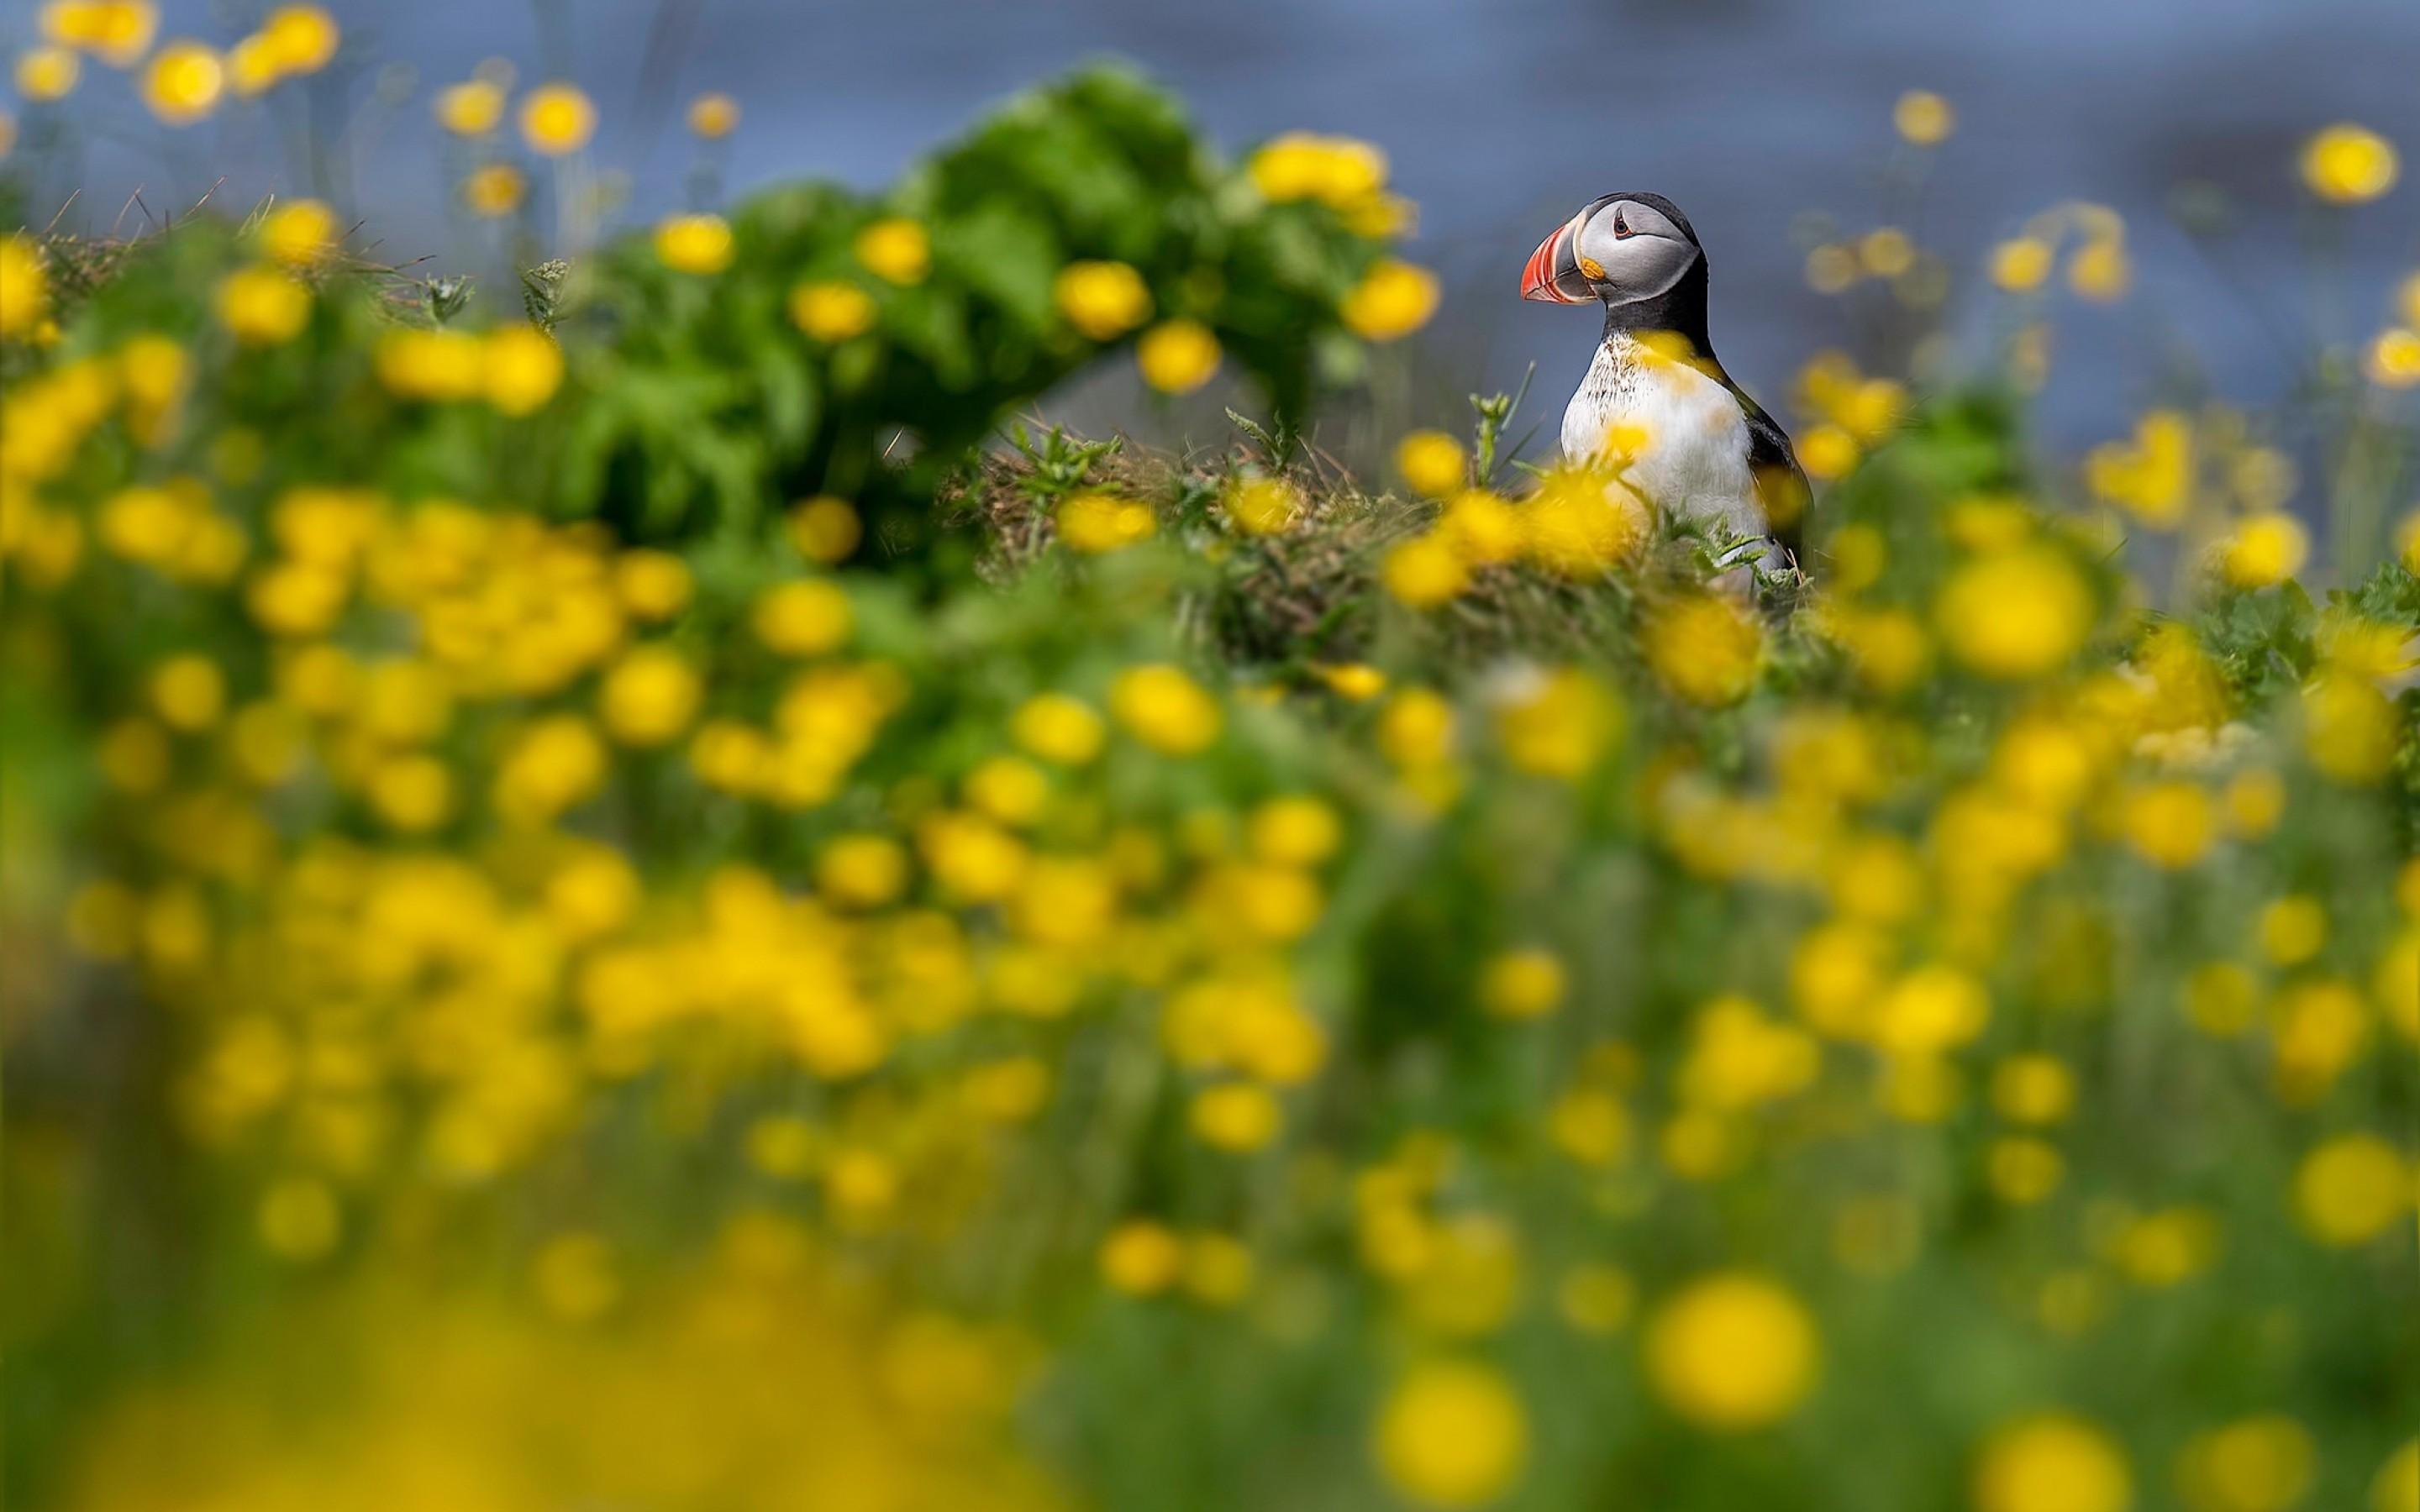 Download 2880x1800 Puffin, Yellow Flowers Wallpaper for MacBook Pro